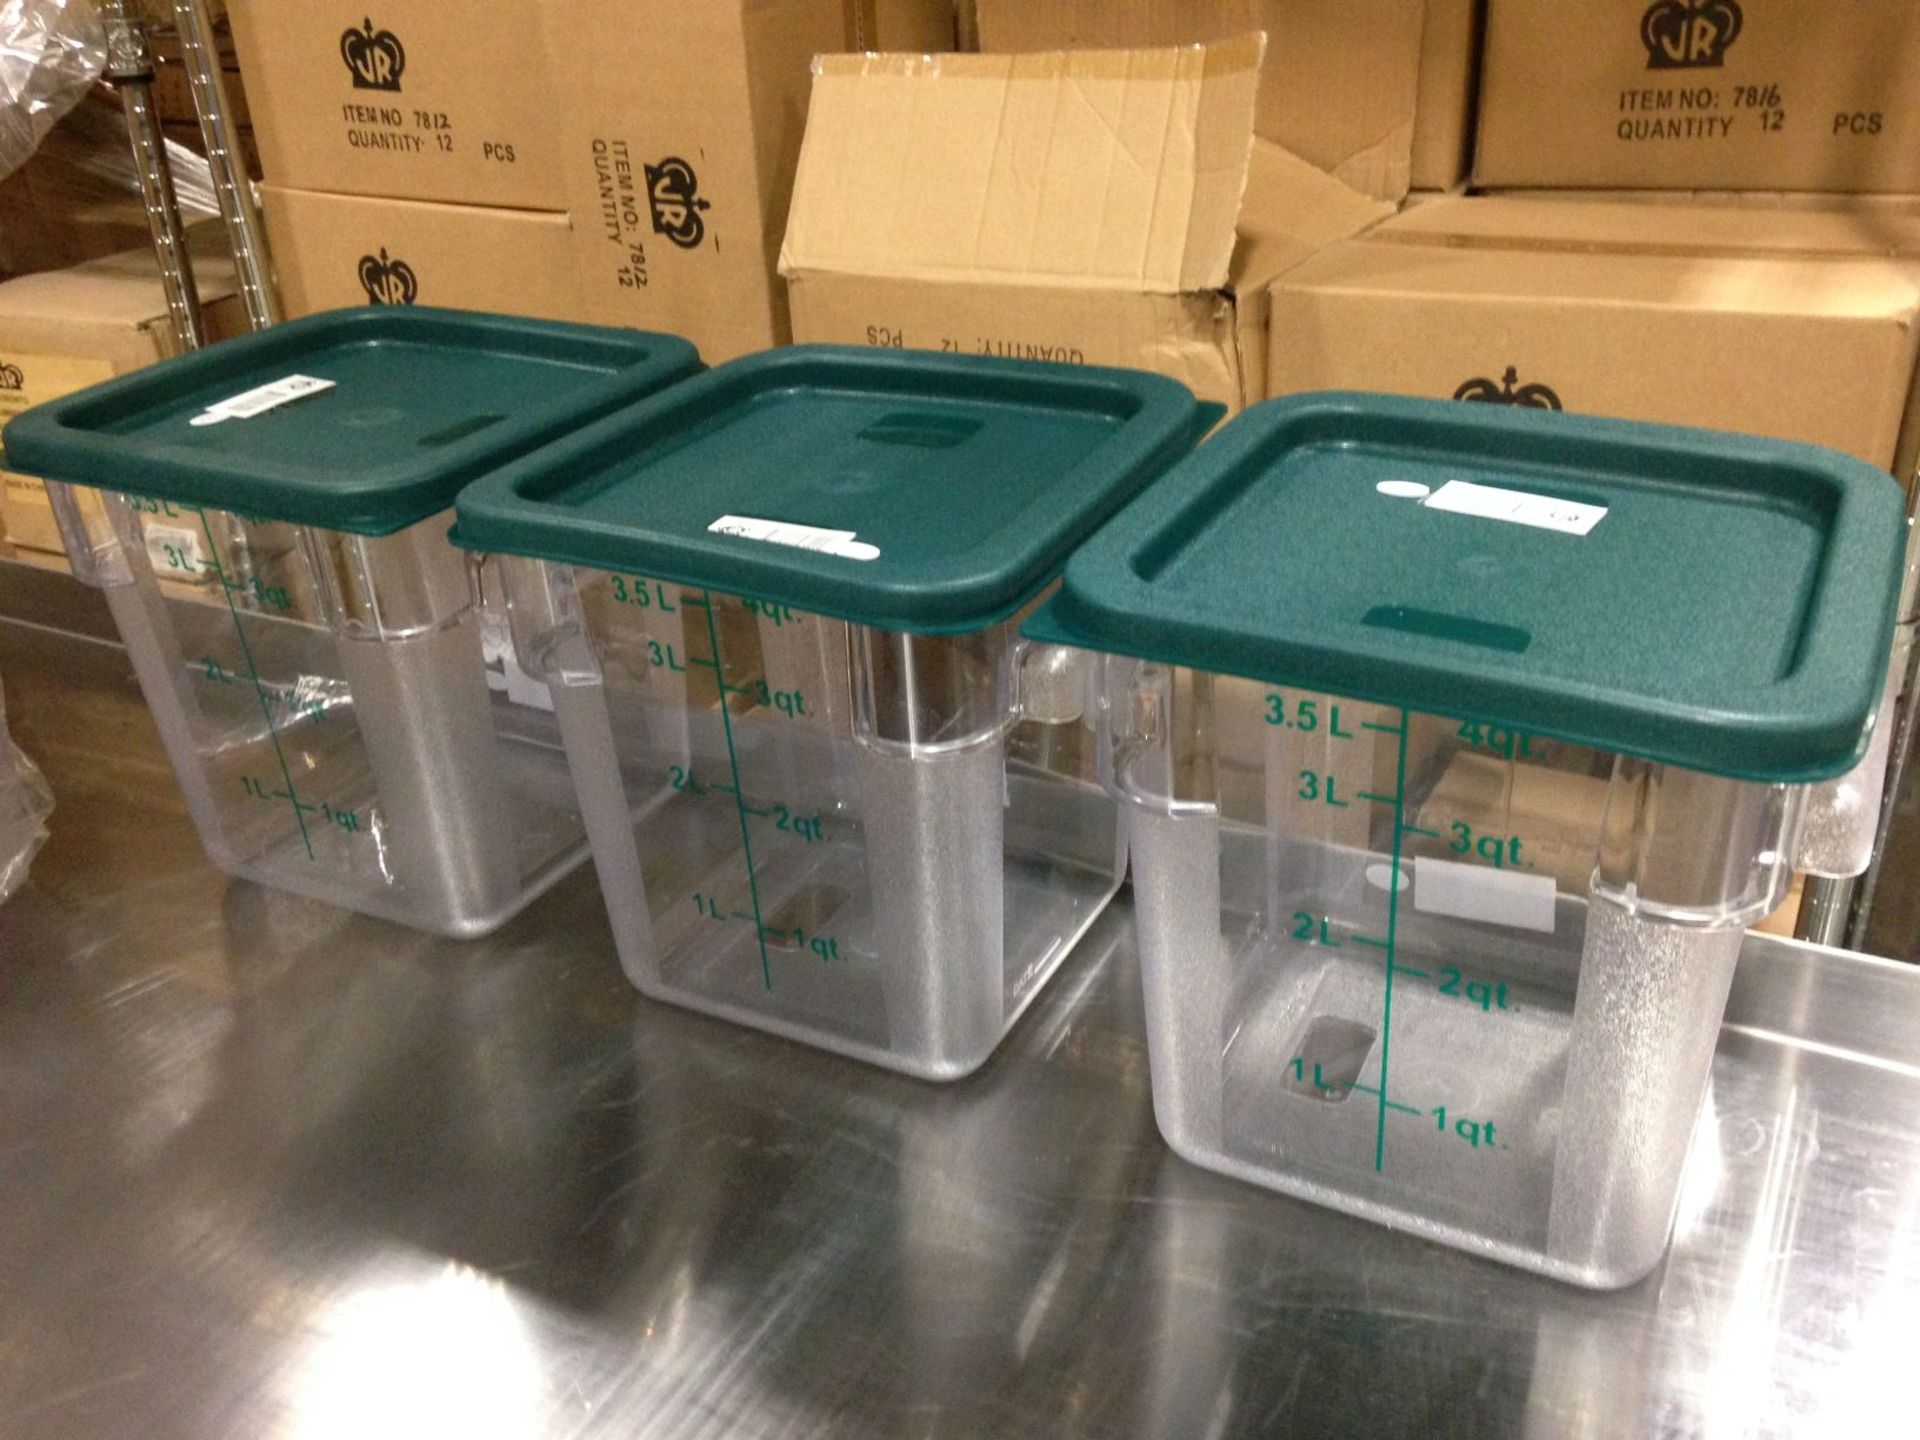 4qt Polycarb Ingredient Bins with Lids - Lot of 3